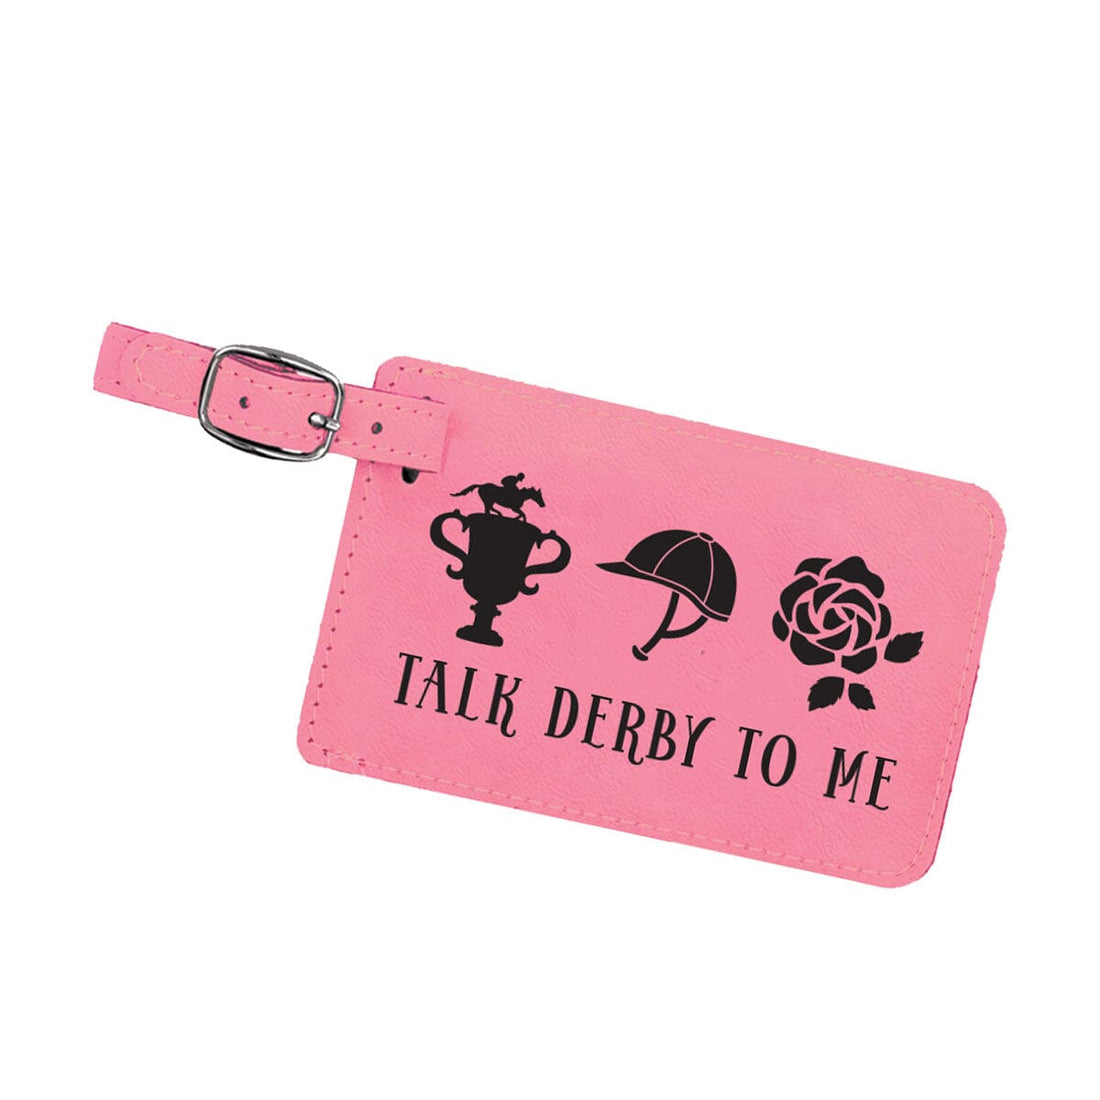 Talk Derby To Me Pink Luggage Tag